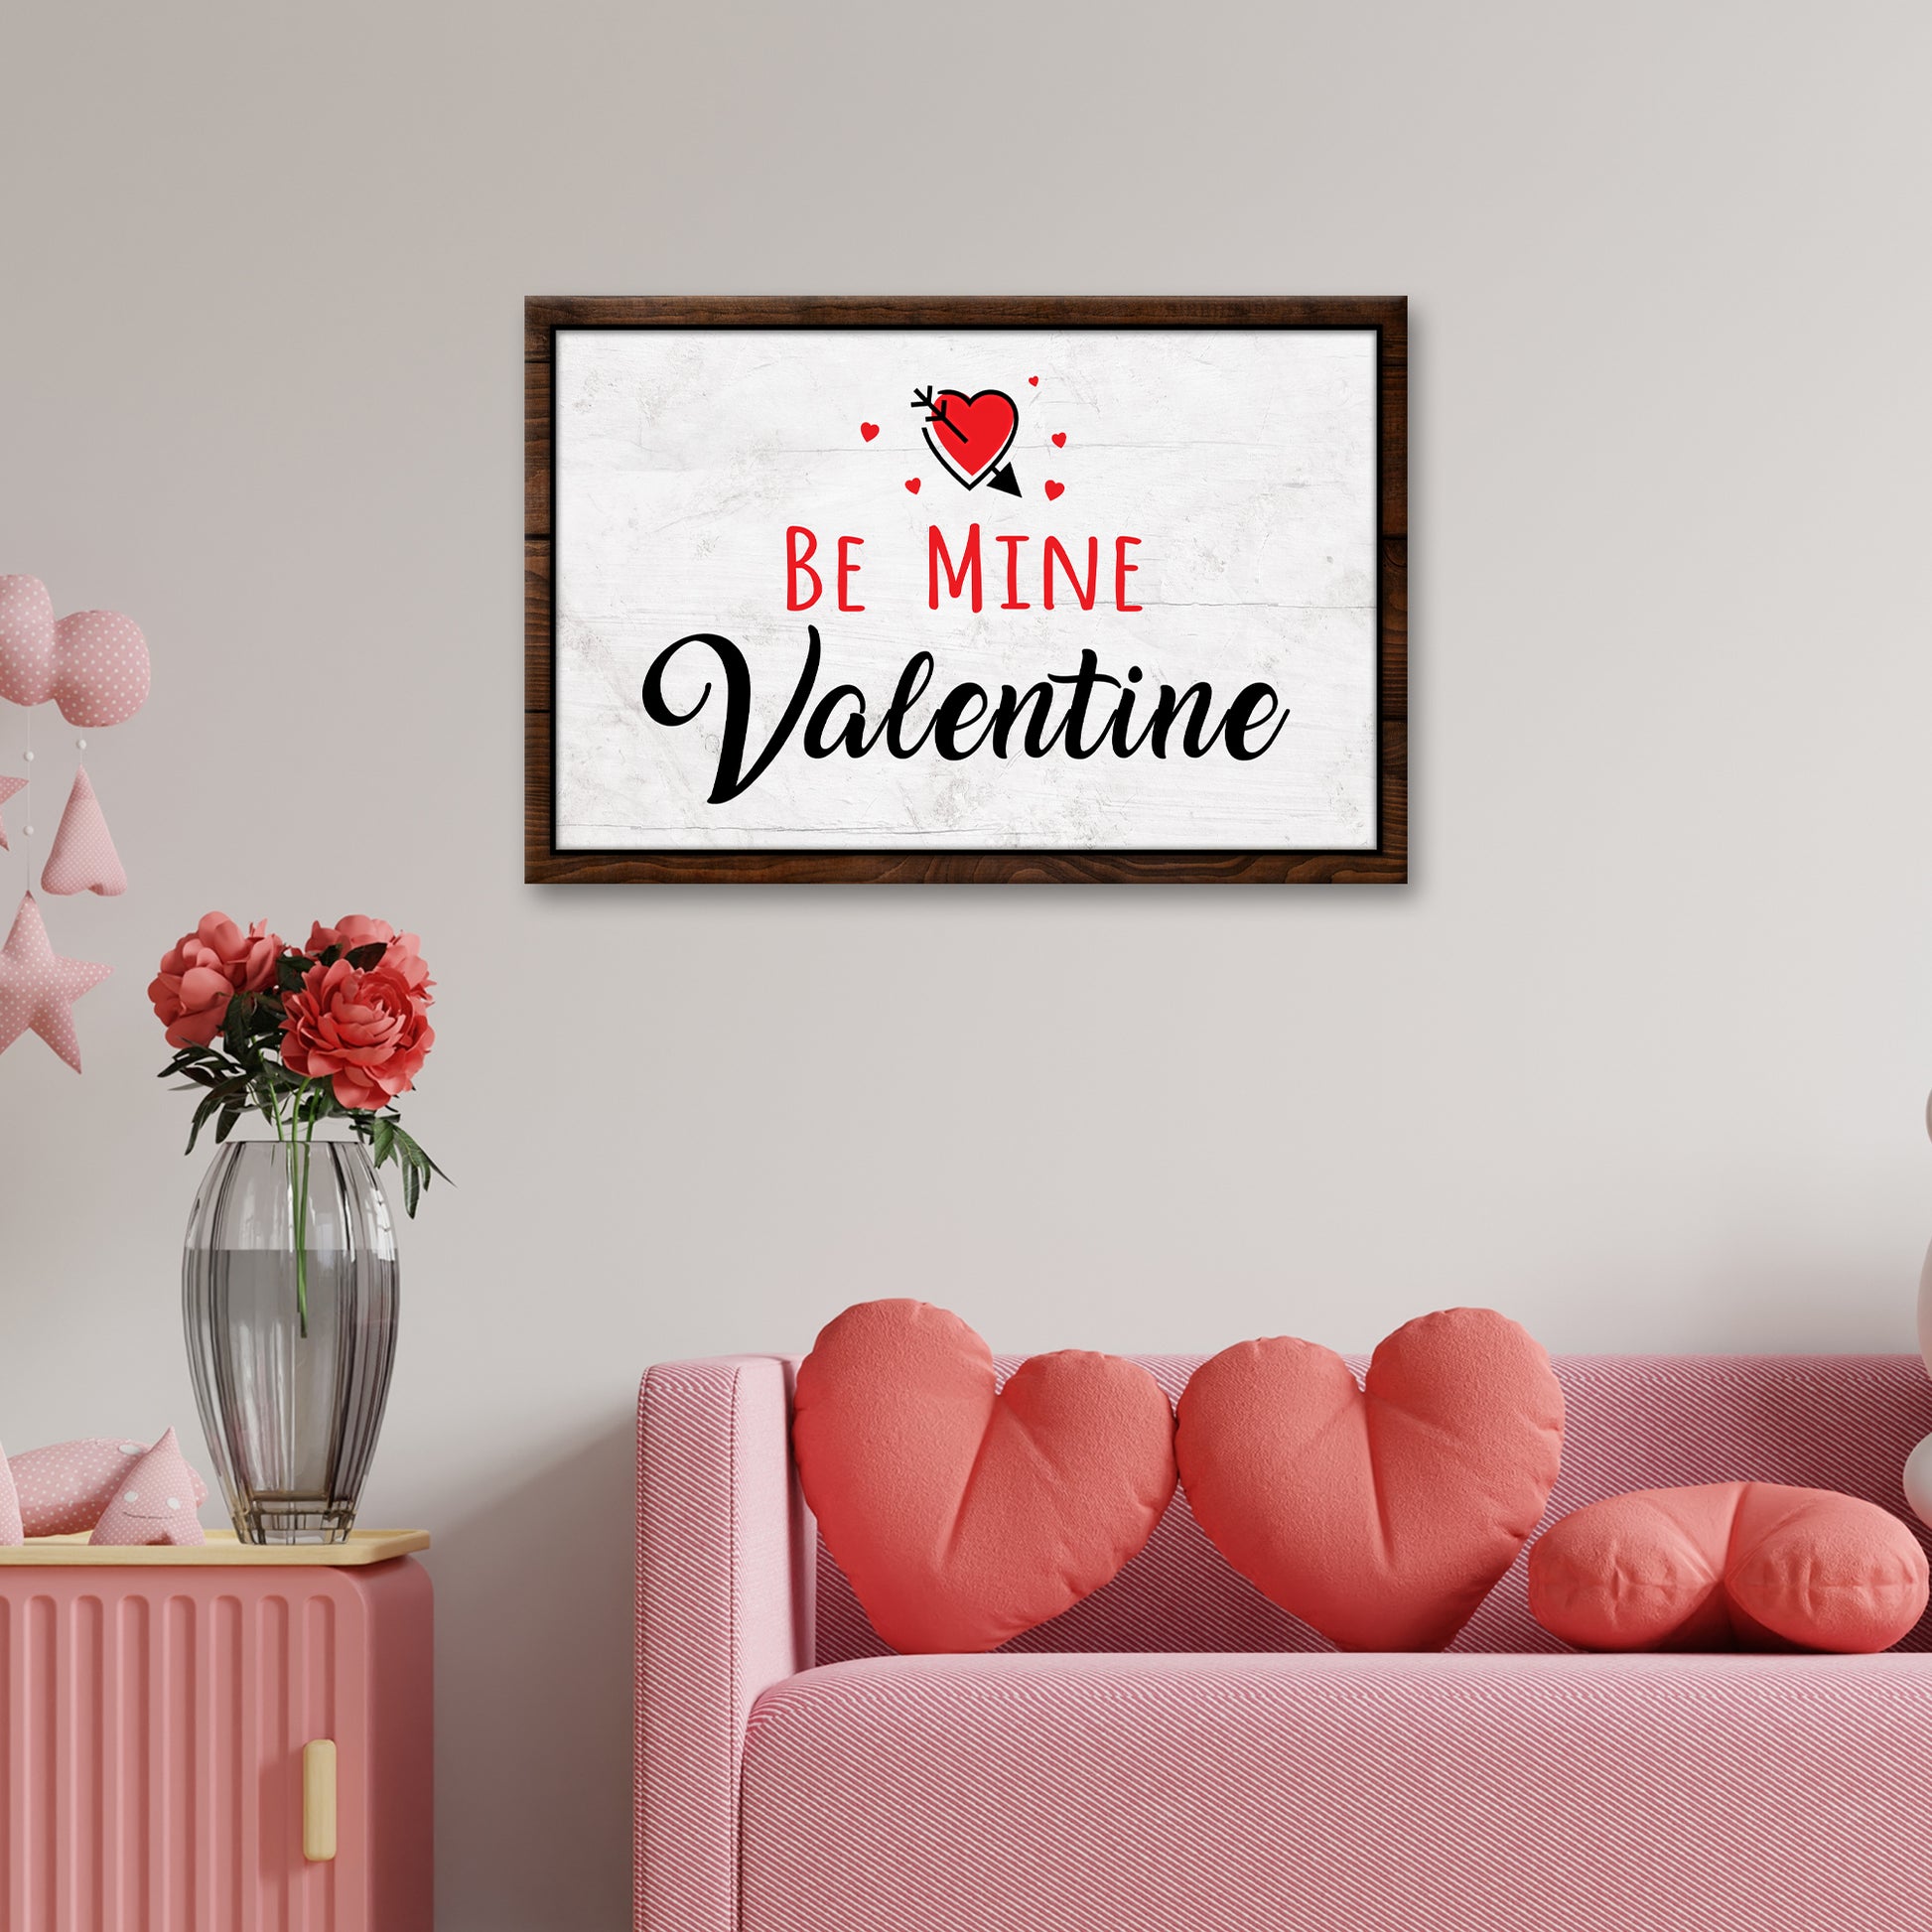 Be Mine Valentine Sign  - Image by Tailored Canvases